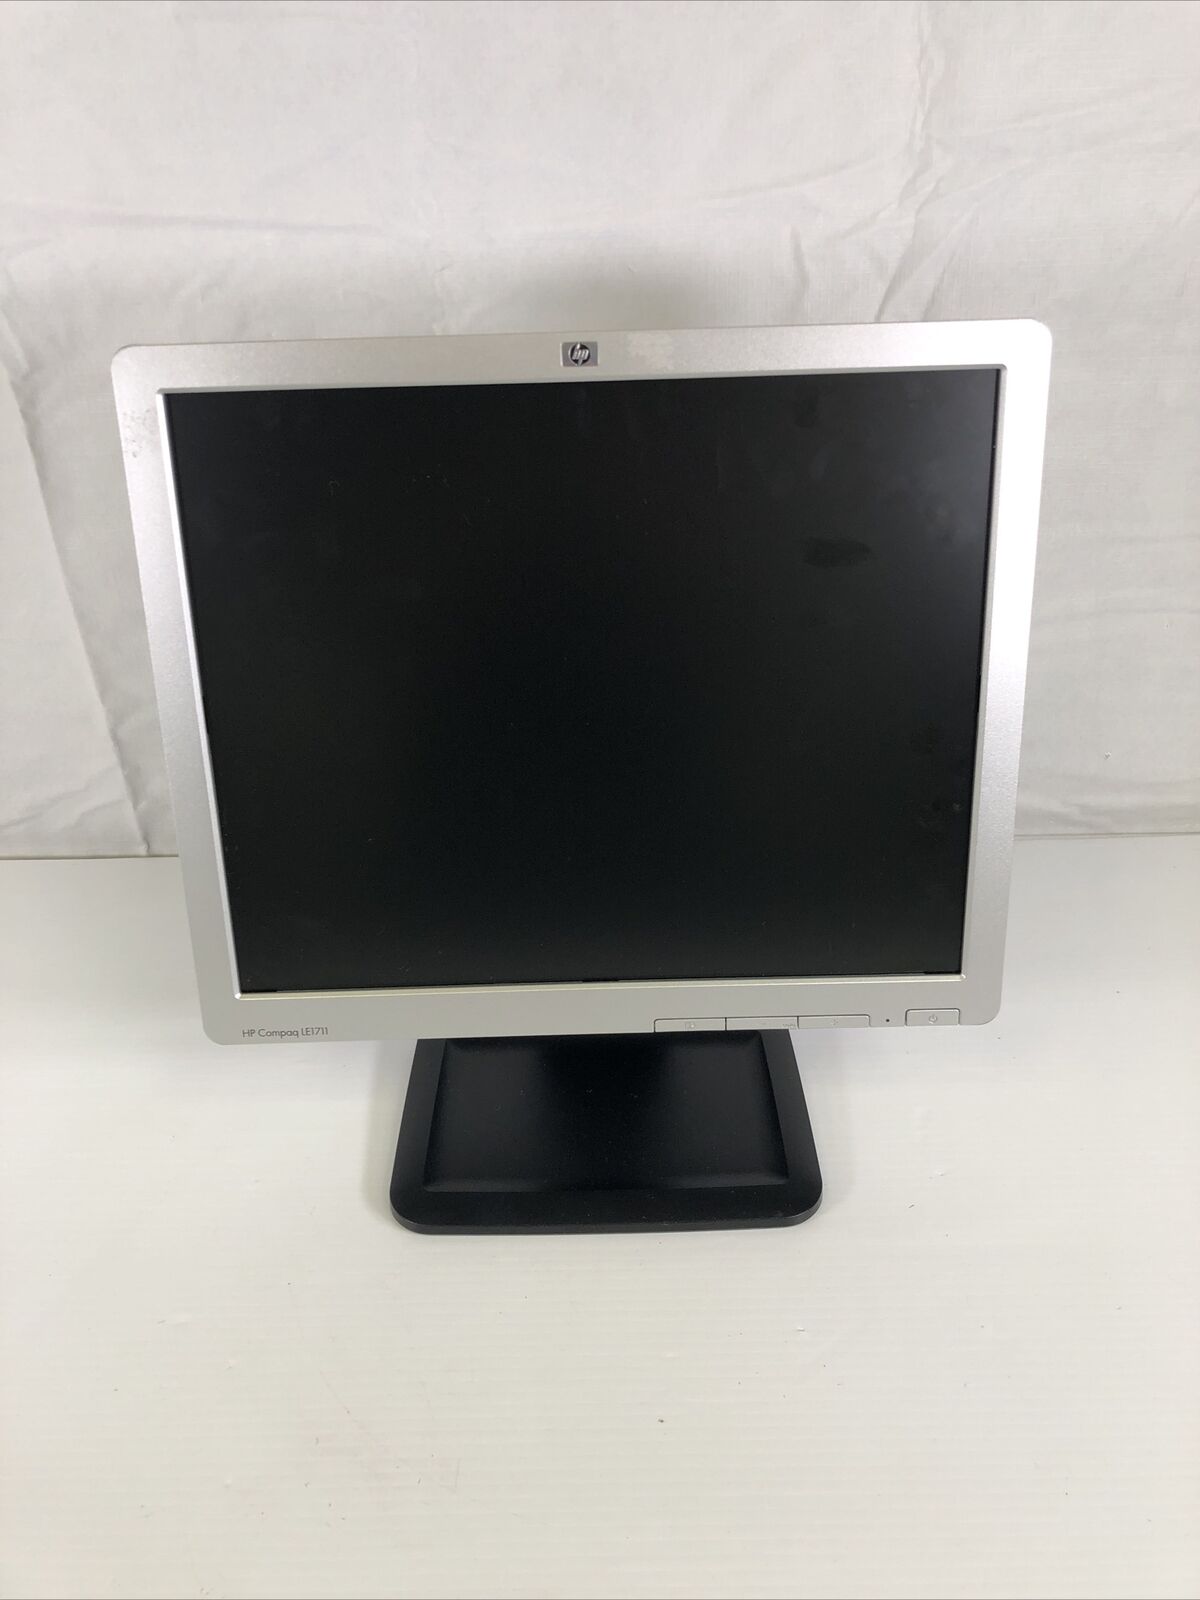 HP Compaq LE1711 17-inch LCD Monitor used. Excellent Condition 